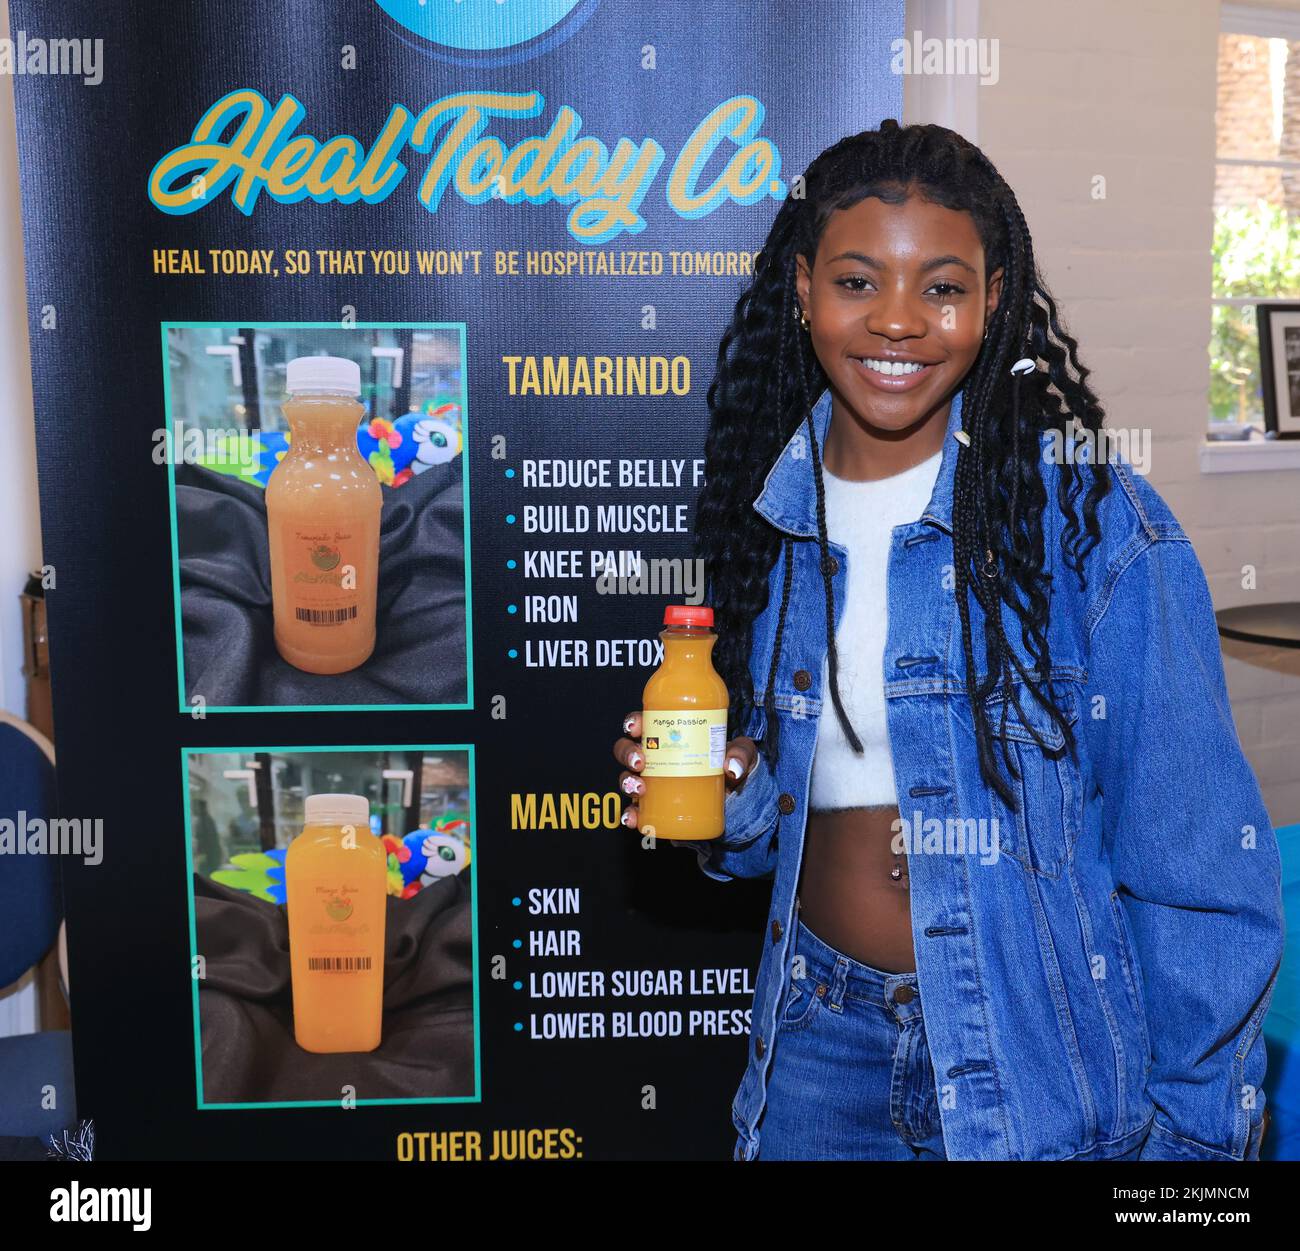 Los Angeles, California, USA. November 19th, 2022. Princess Mapp at the Heal Today company booth holds one of their juice products at the Product Hollywood & the Celebrity Gifting Suites in the Celebration of the 2022 American Music Awards at the Historic Woman's Club of Hollywood  in Los Angeles, California. Credit: Sheri Determan Stock Photo